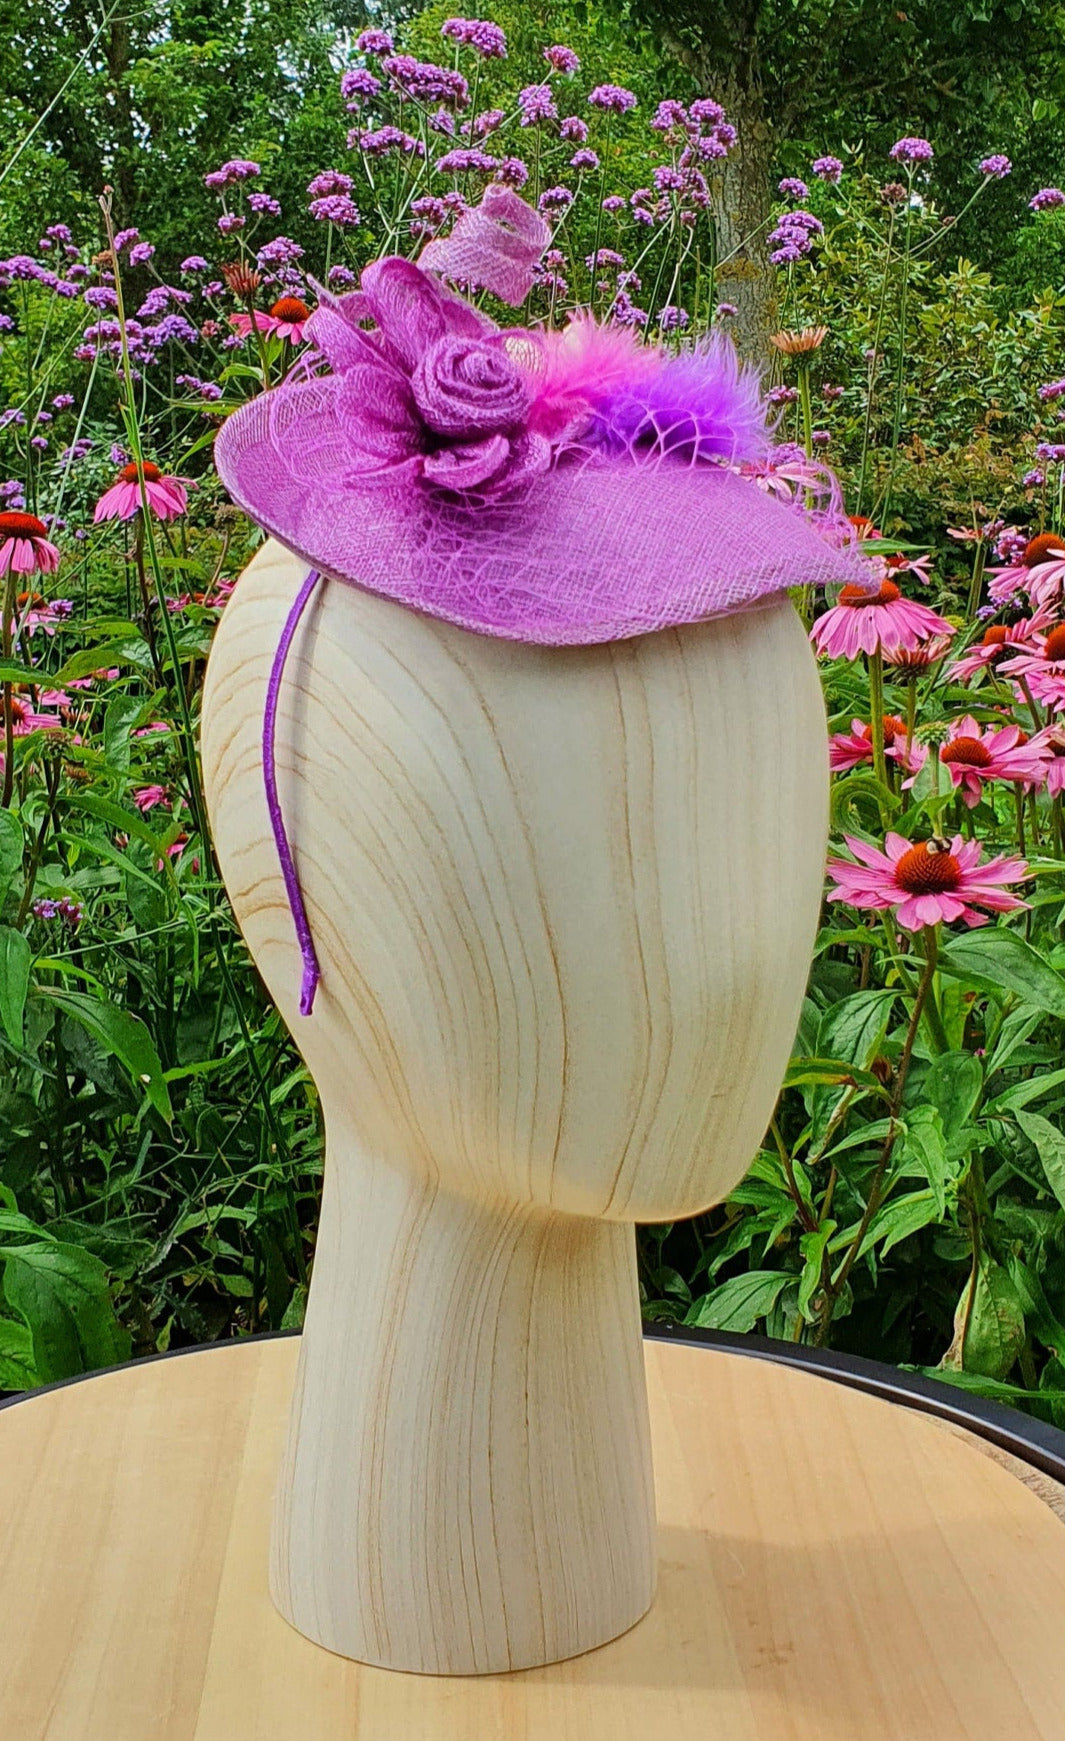 Handmade purple oval fascinator from Sinamay with pink and purple feathers and bows